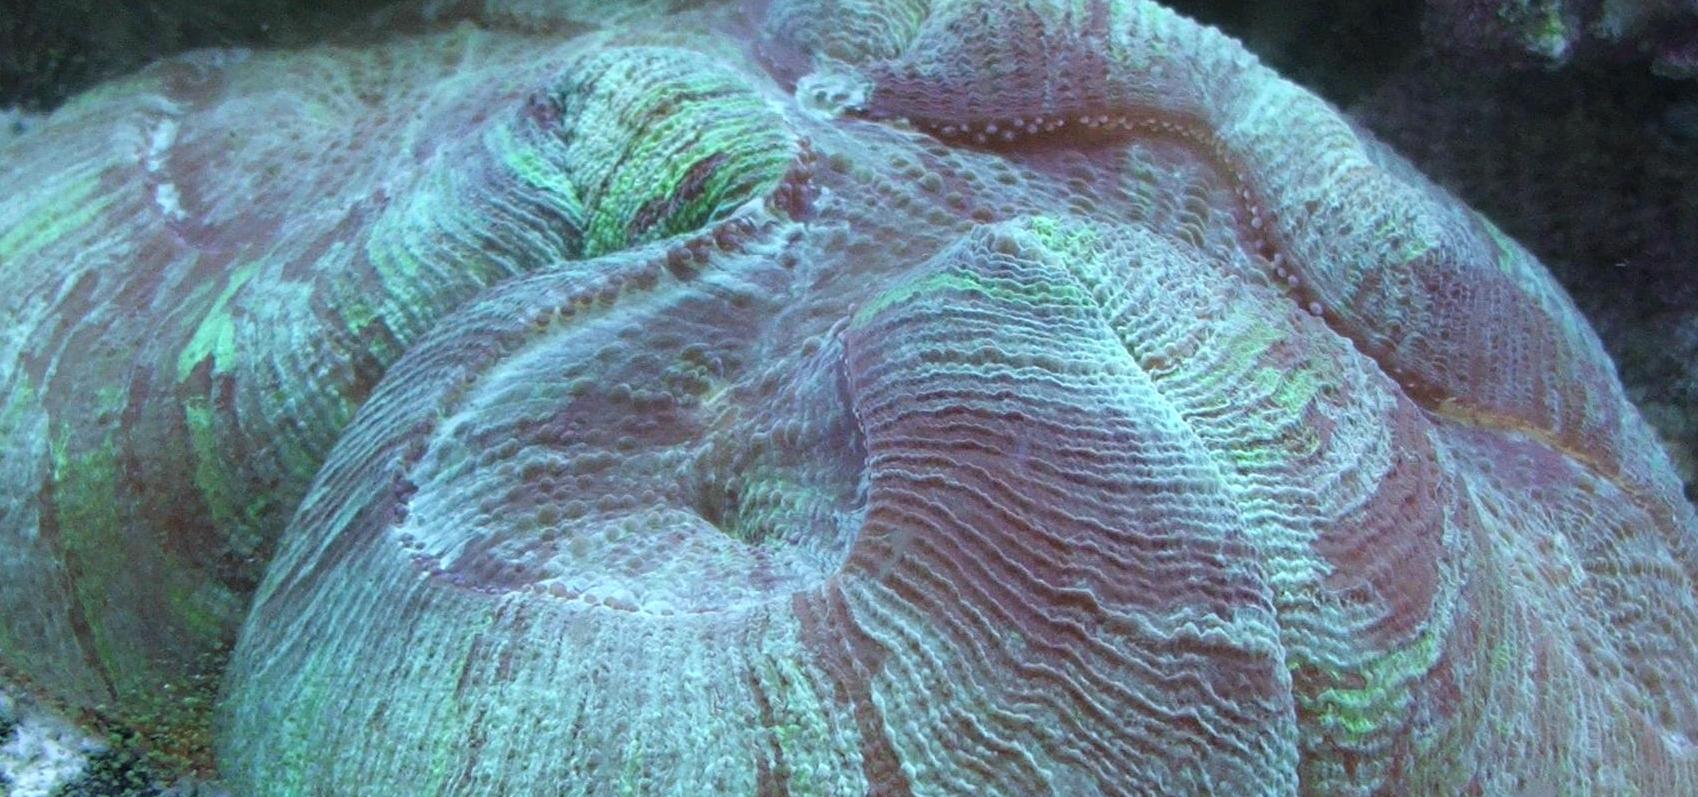 Here is a pic of my Brain Coral really swelled up.